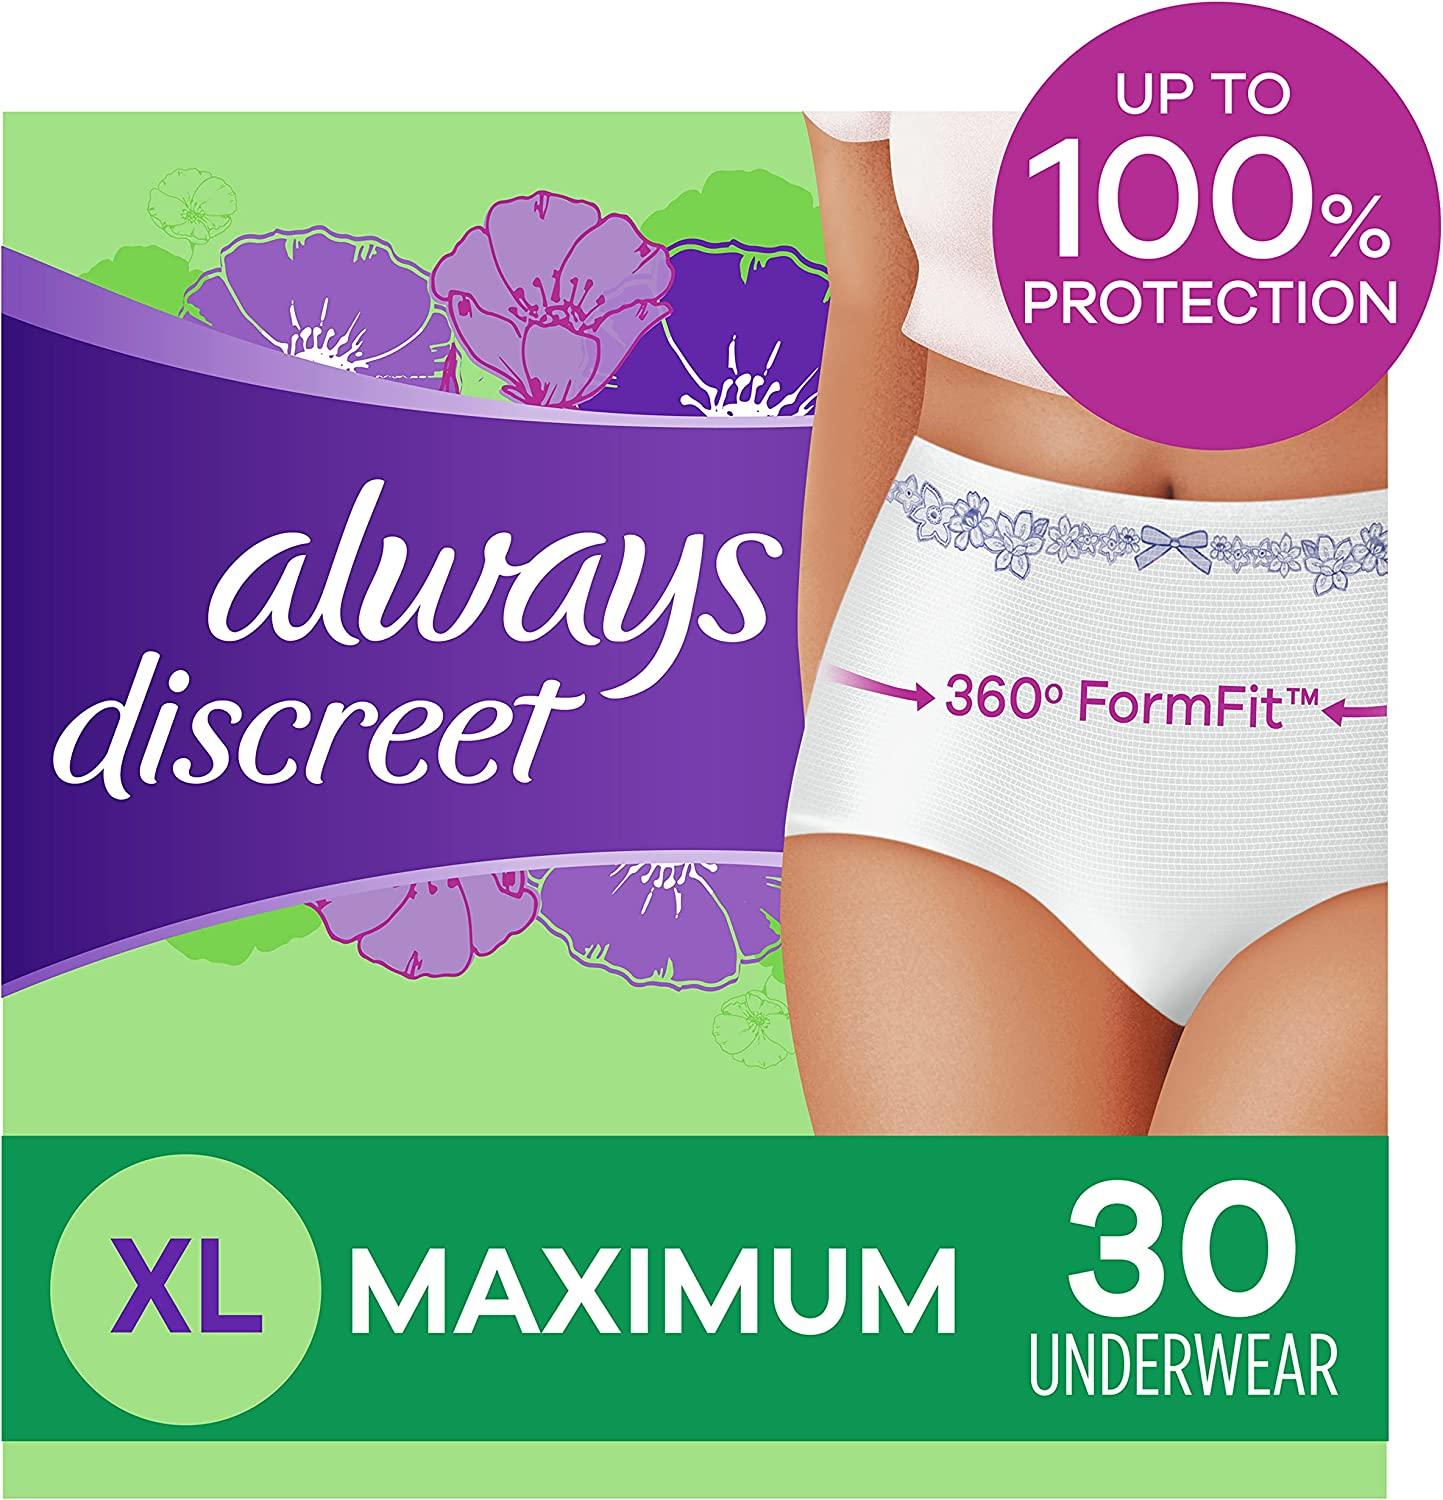 Ecological Absorbent Underwear for Urinary Leakage PLUS - Size M